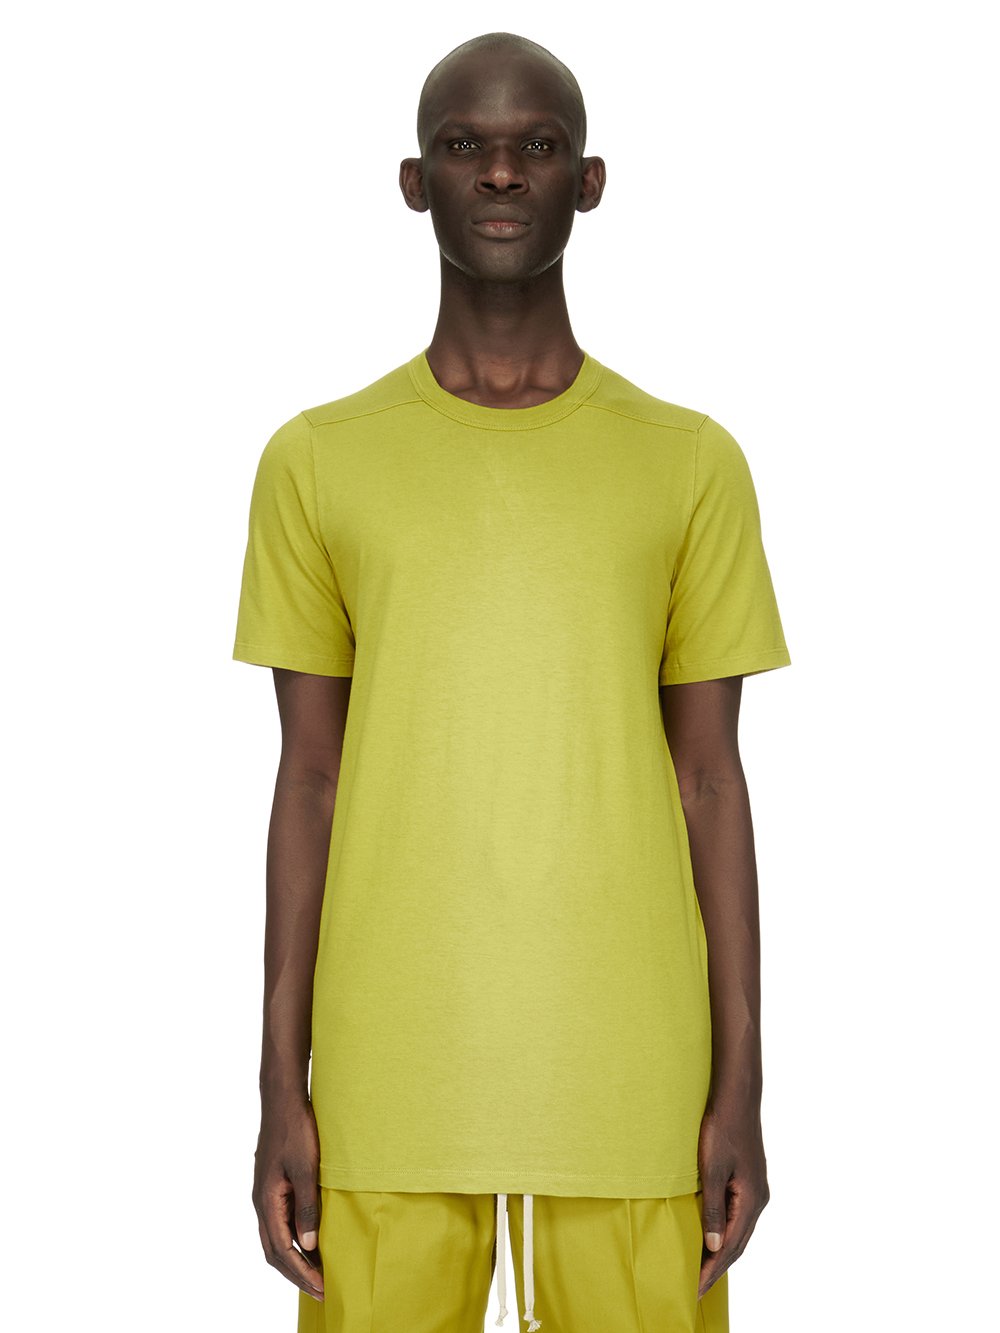 RICK OWENS FW23 LUXOR LEVEL T IN ACID YELLOW CLASSIC COTTON JERSEY